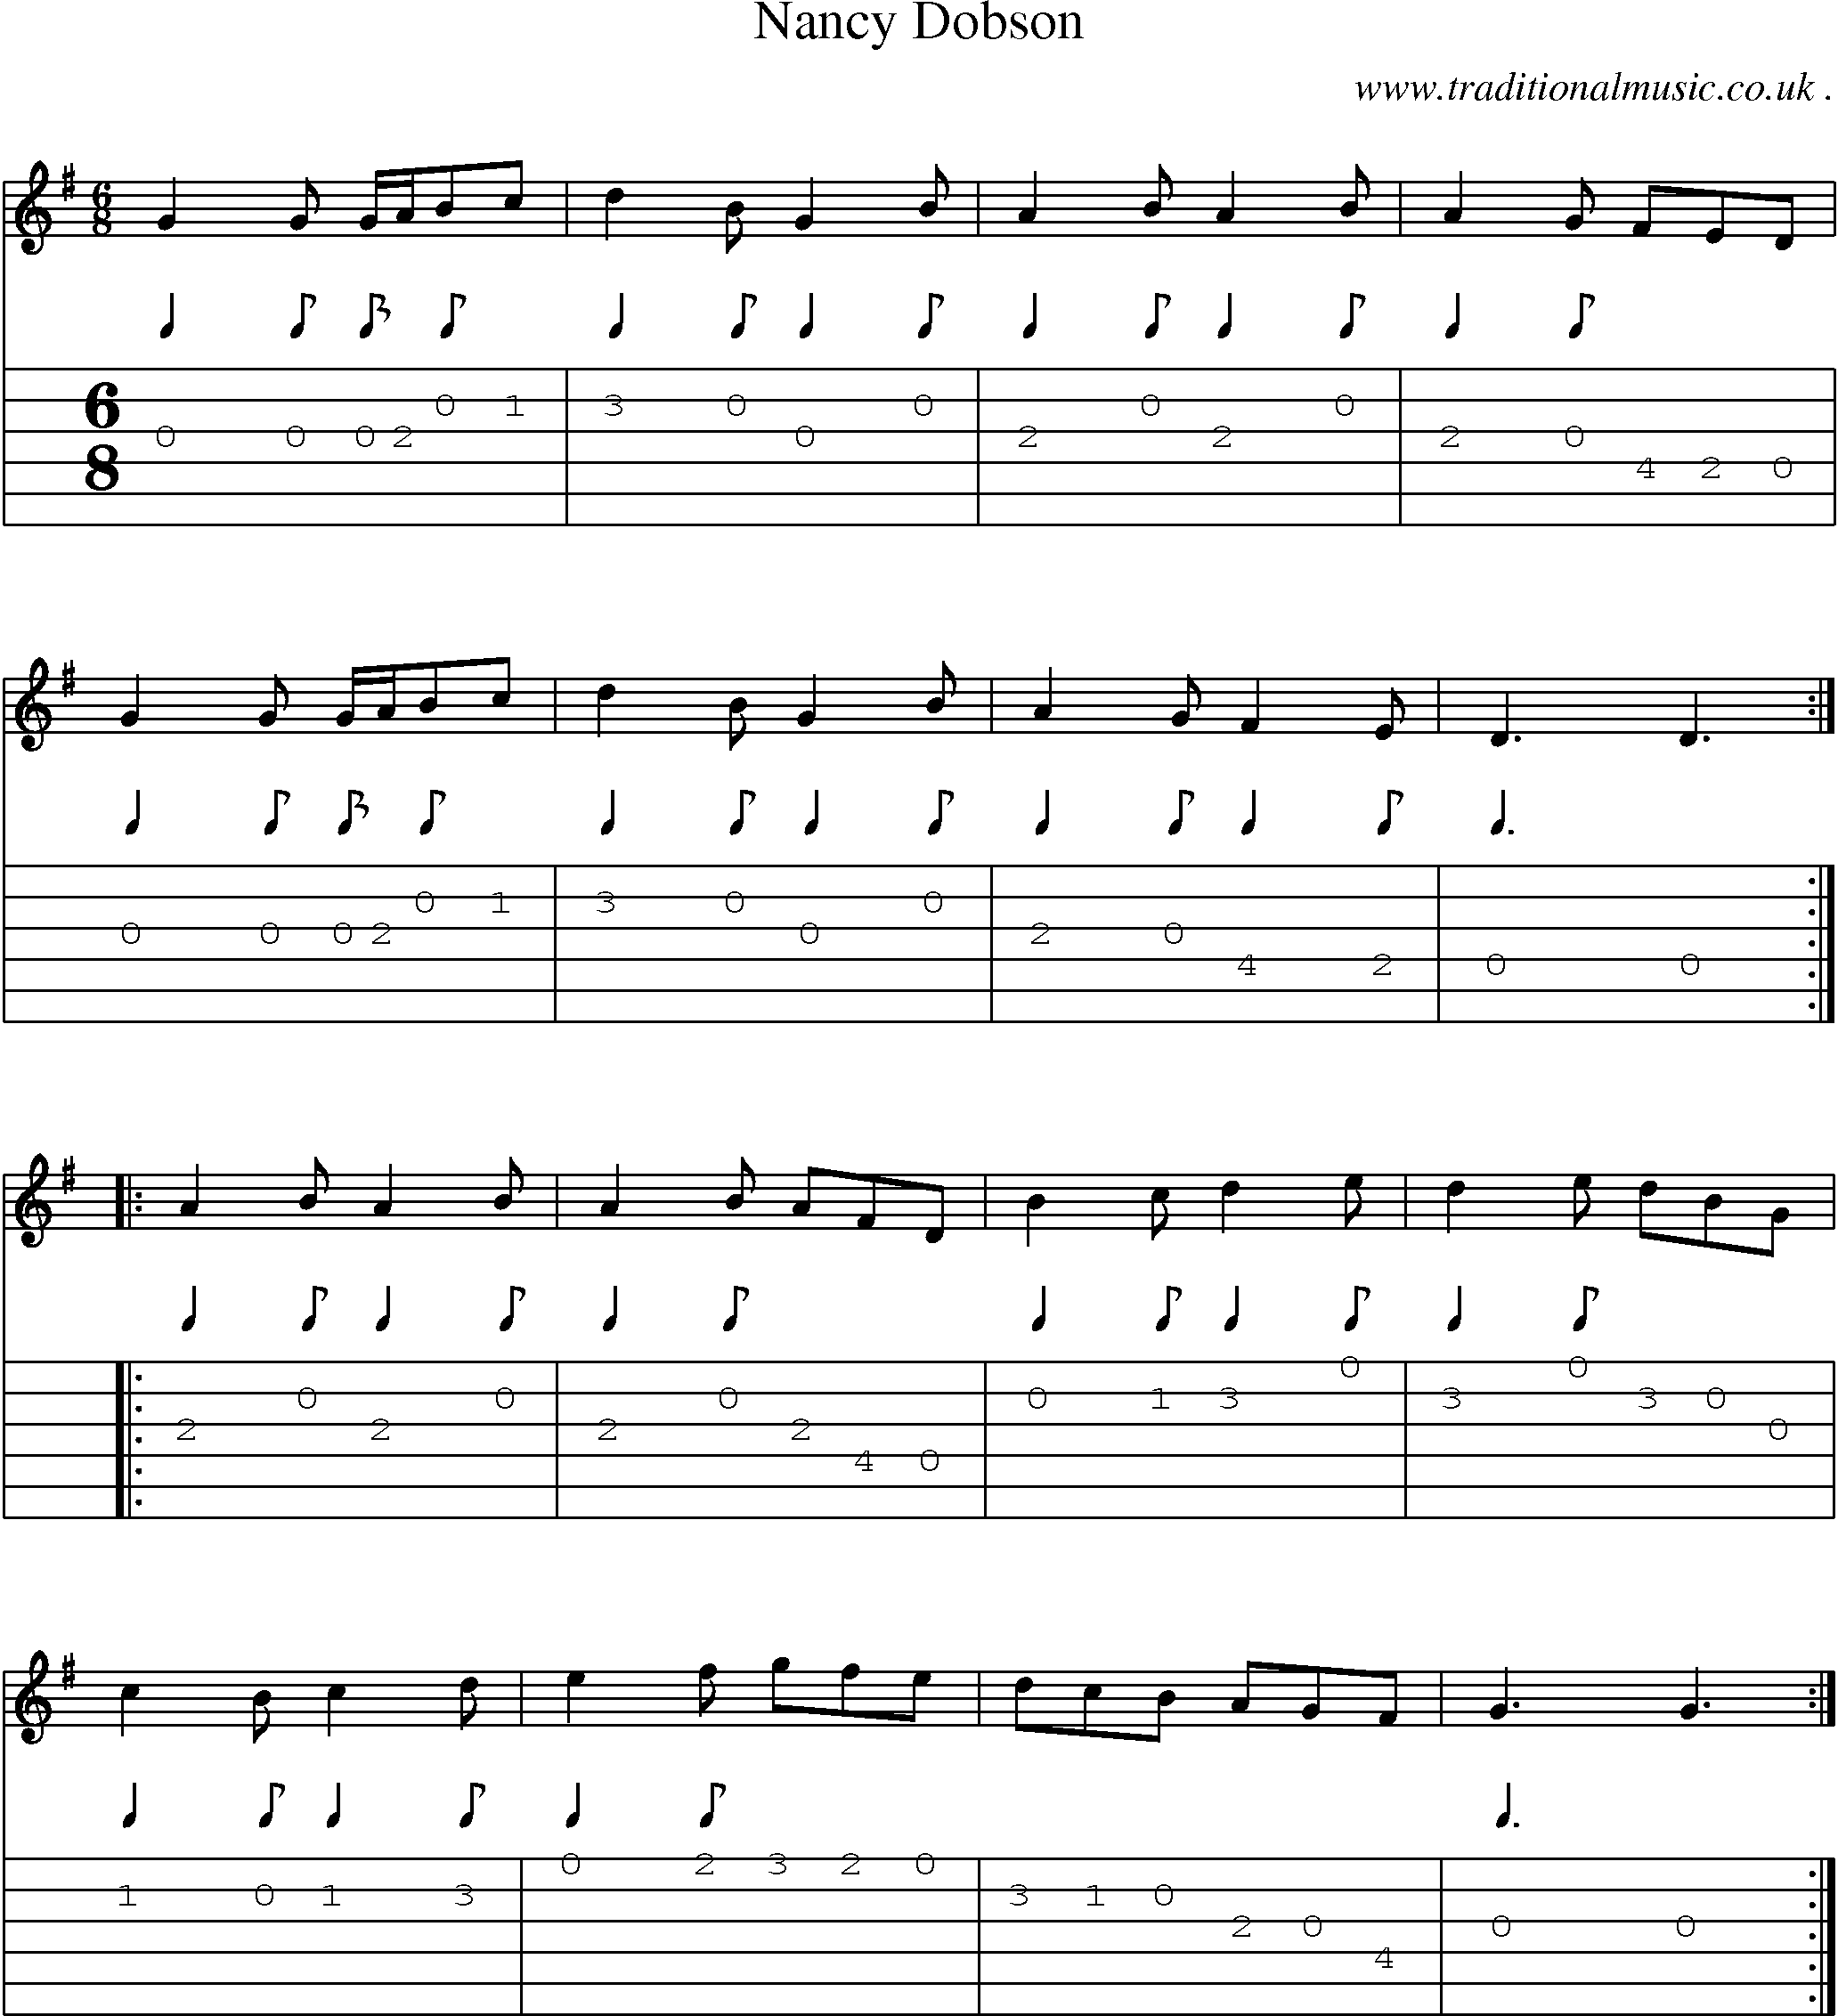 Sheet-Music and Guitar Tabs for Nancy Dobson